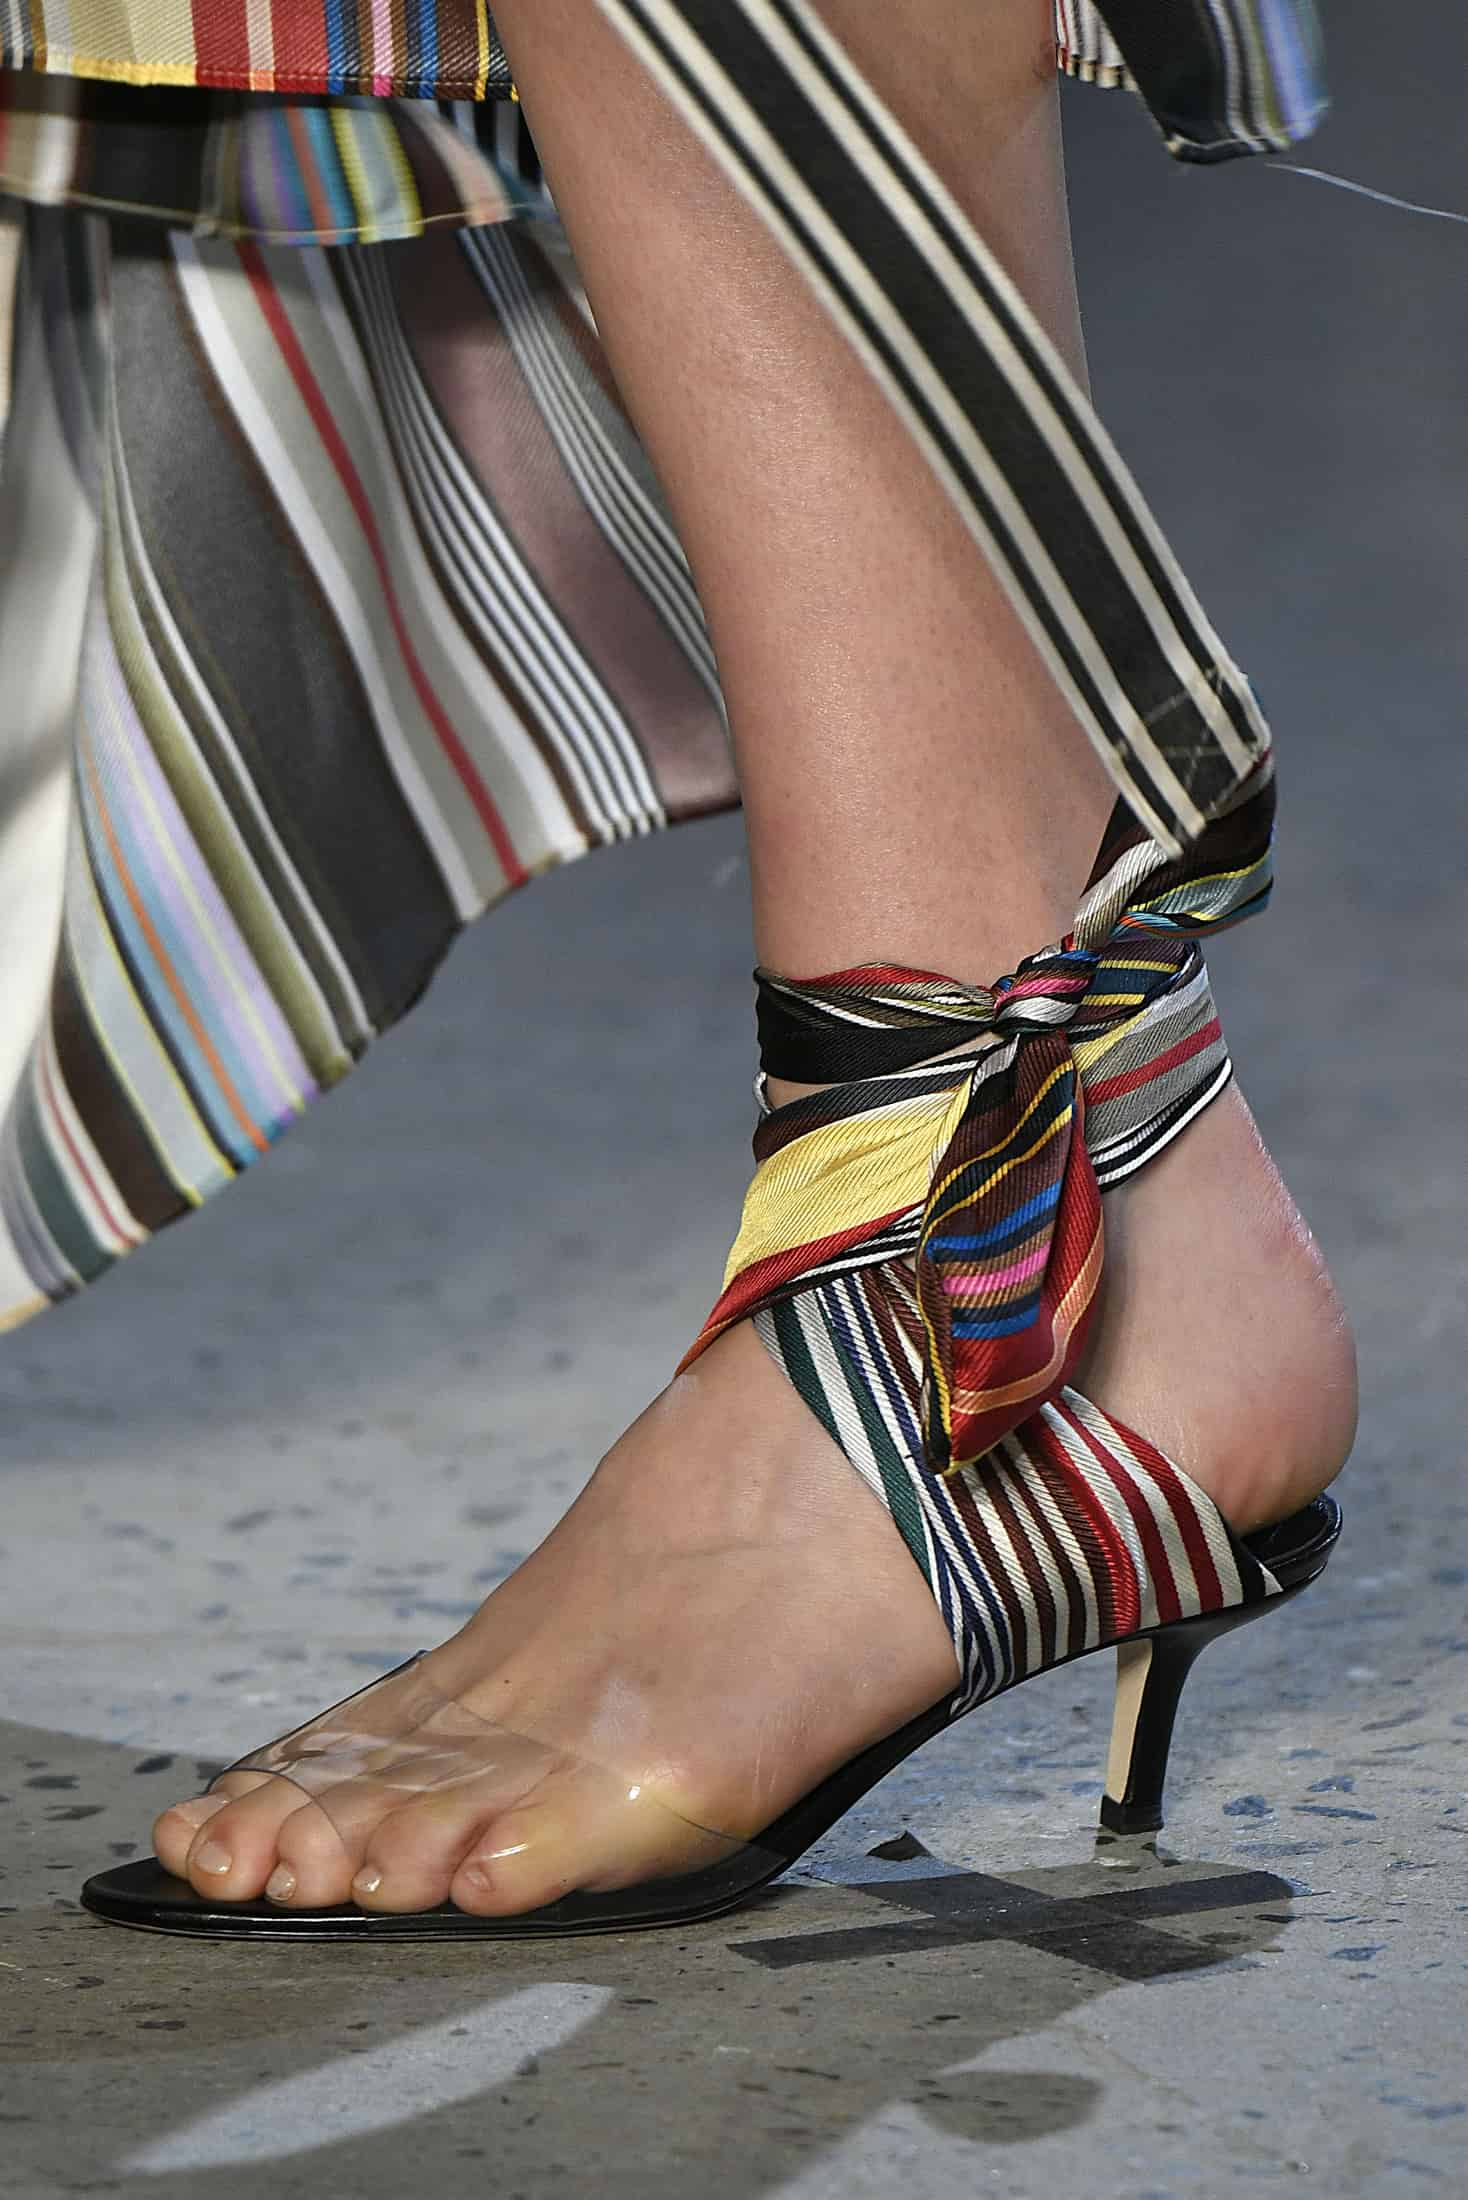 30 of the Best Shoes From the Spring 2019 NYFW Shows - Daily Front Row